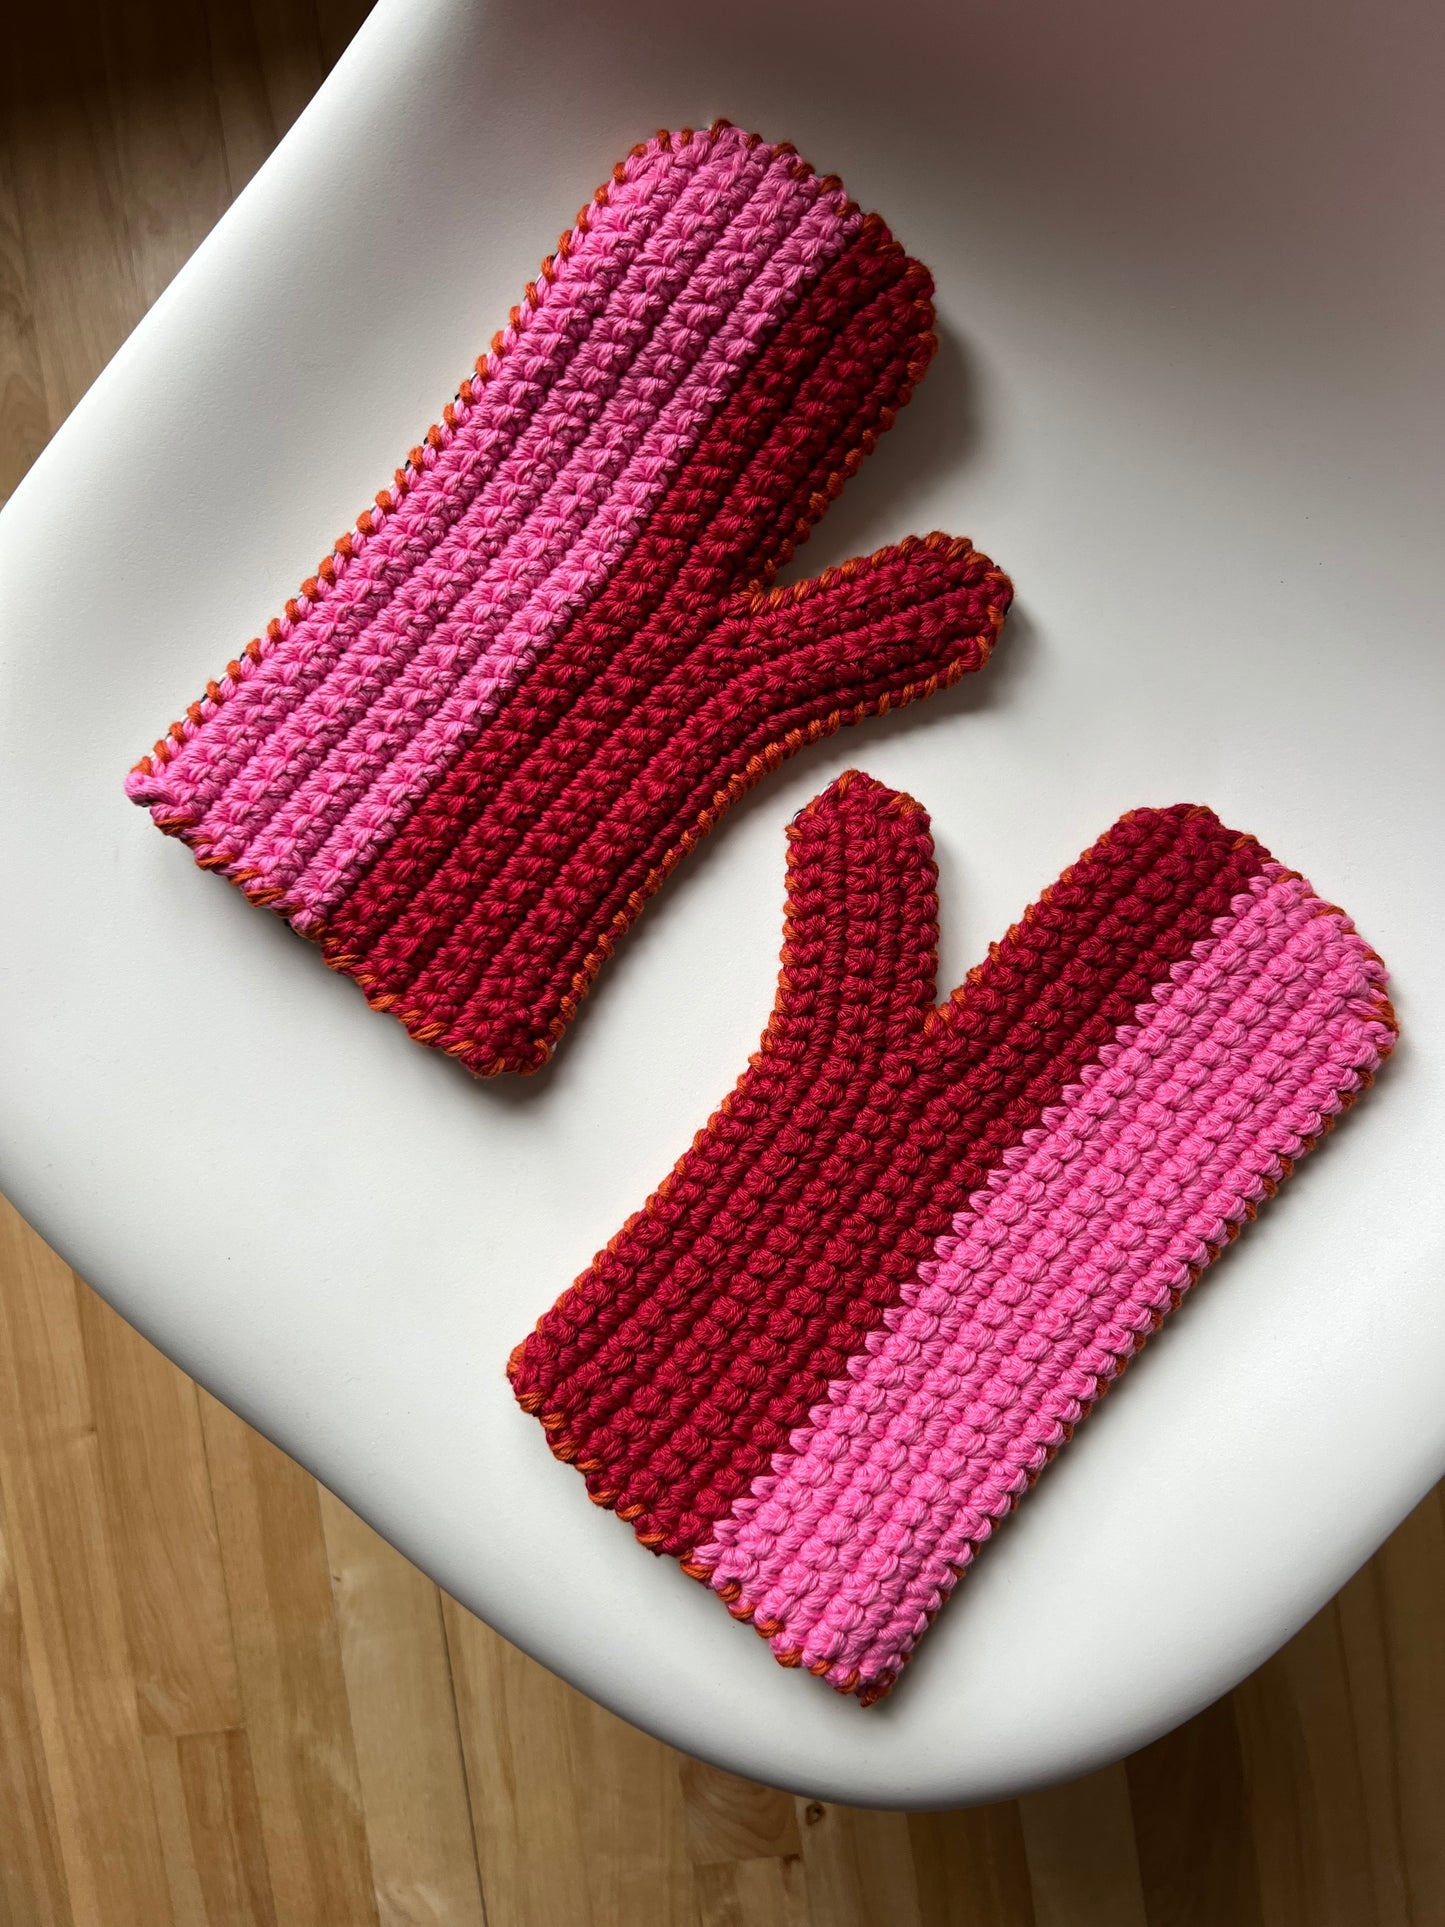 The Oven Mitts Pattern